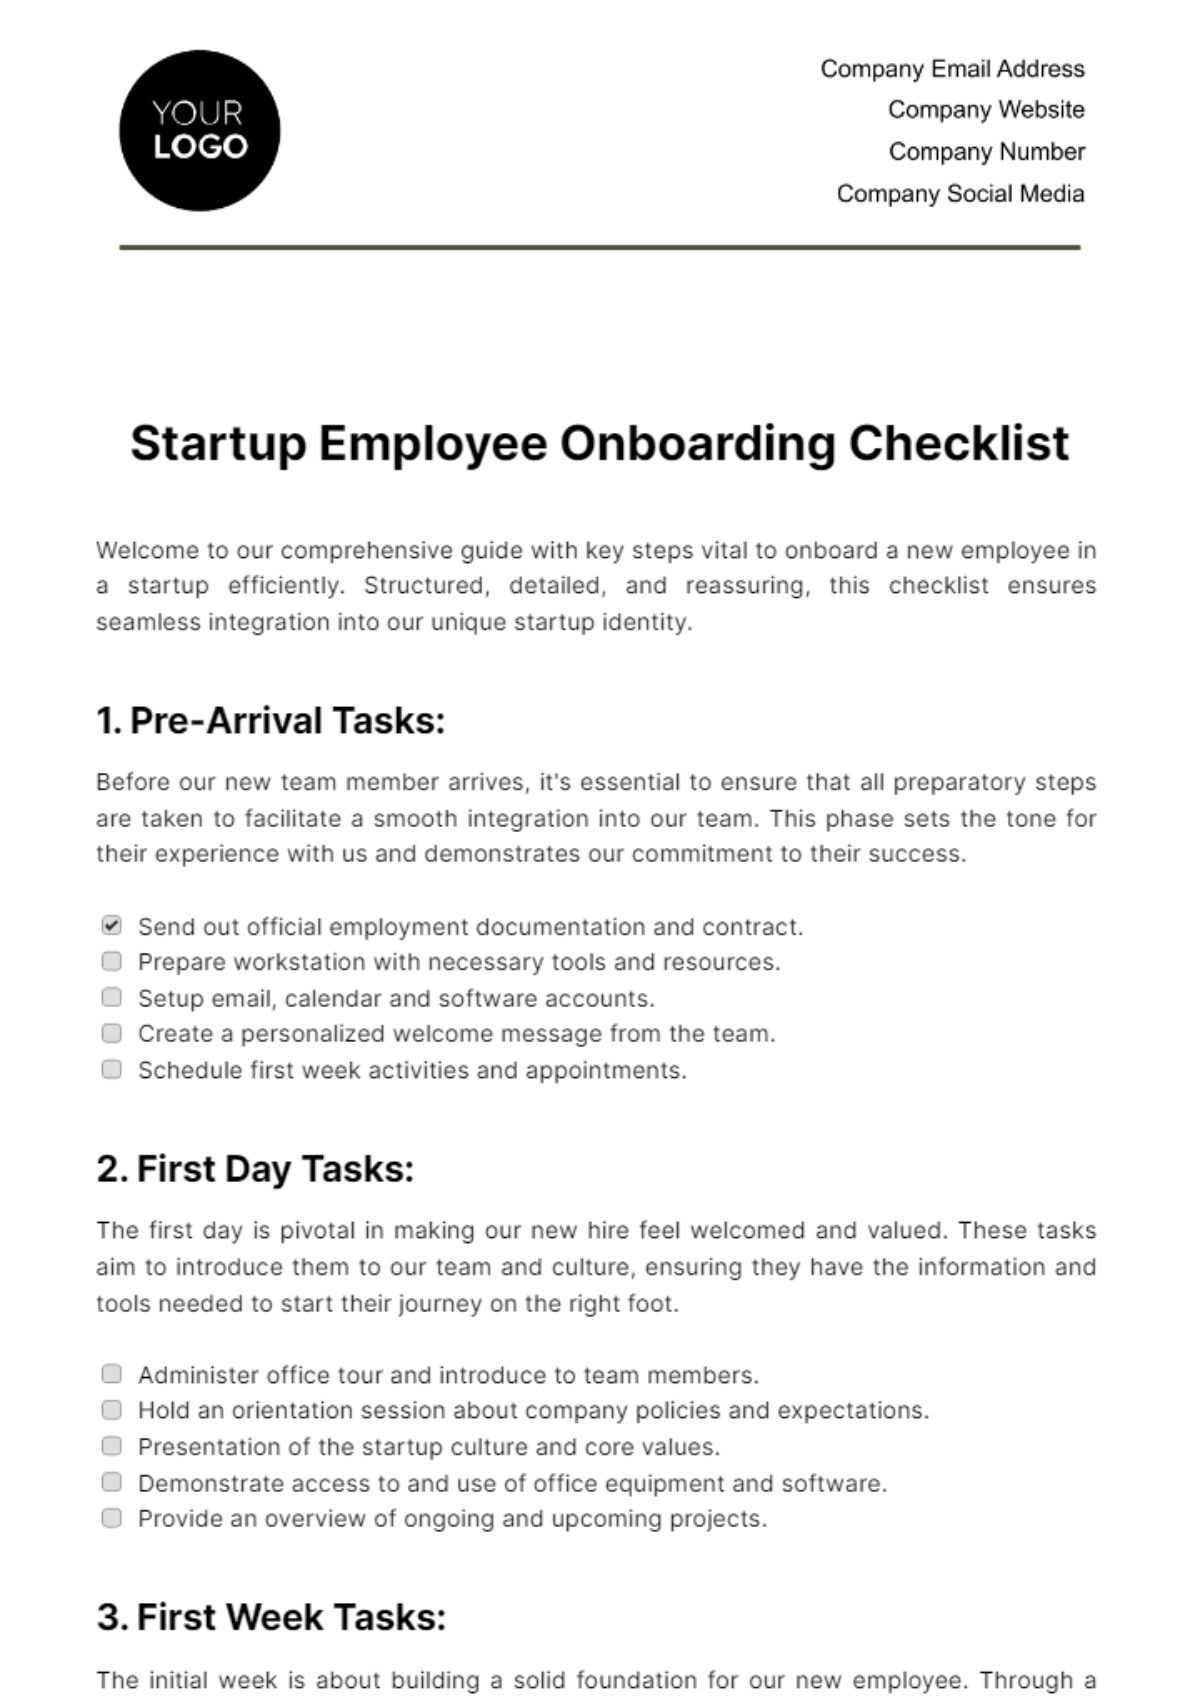 Free Startup Employee Onboarding Checklist Template